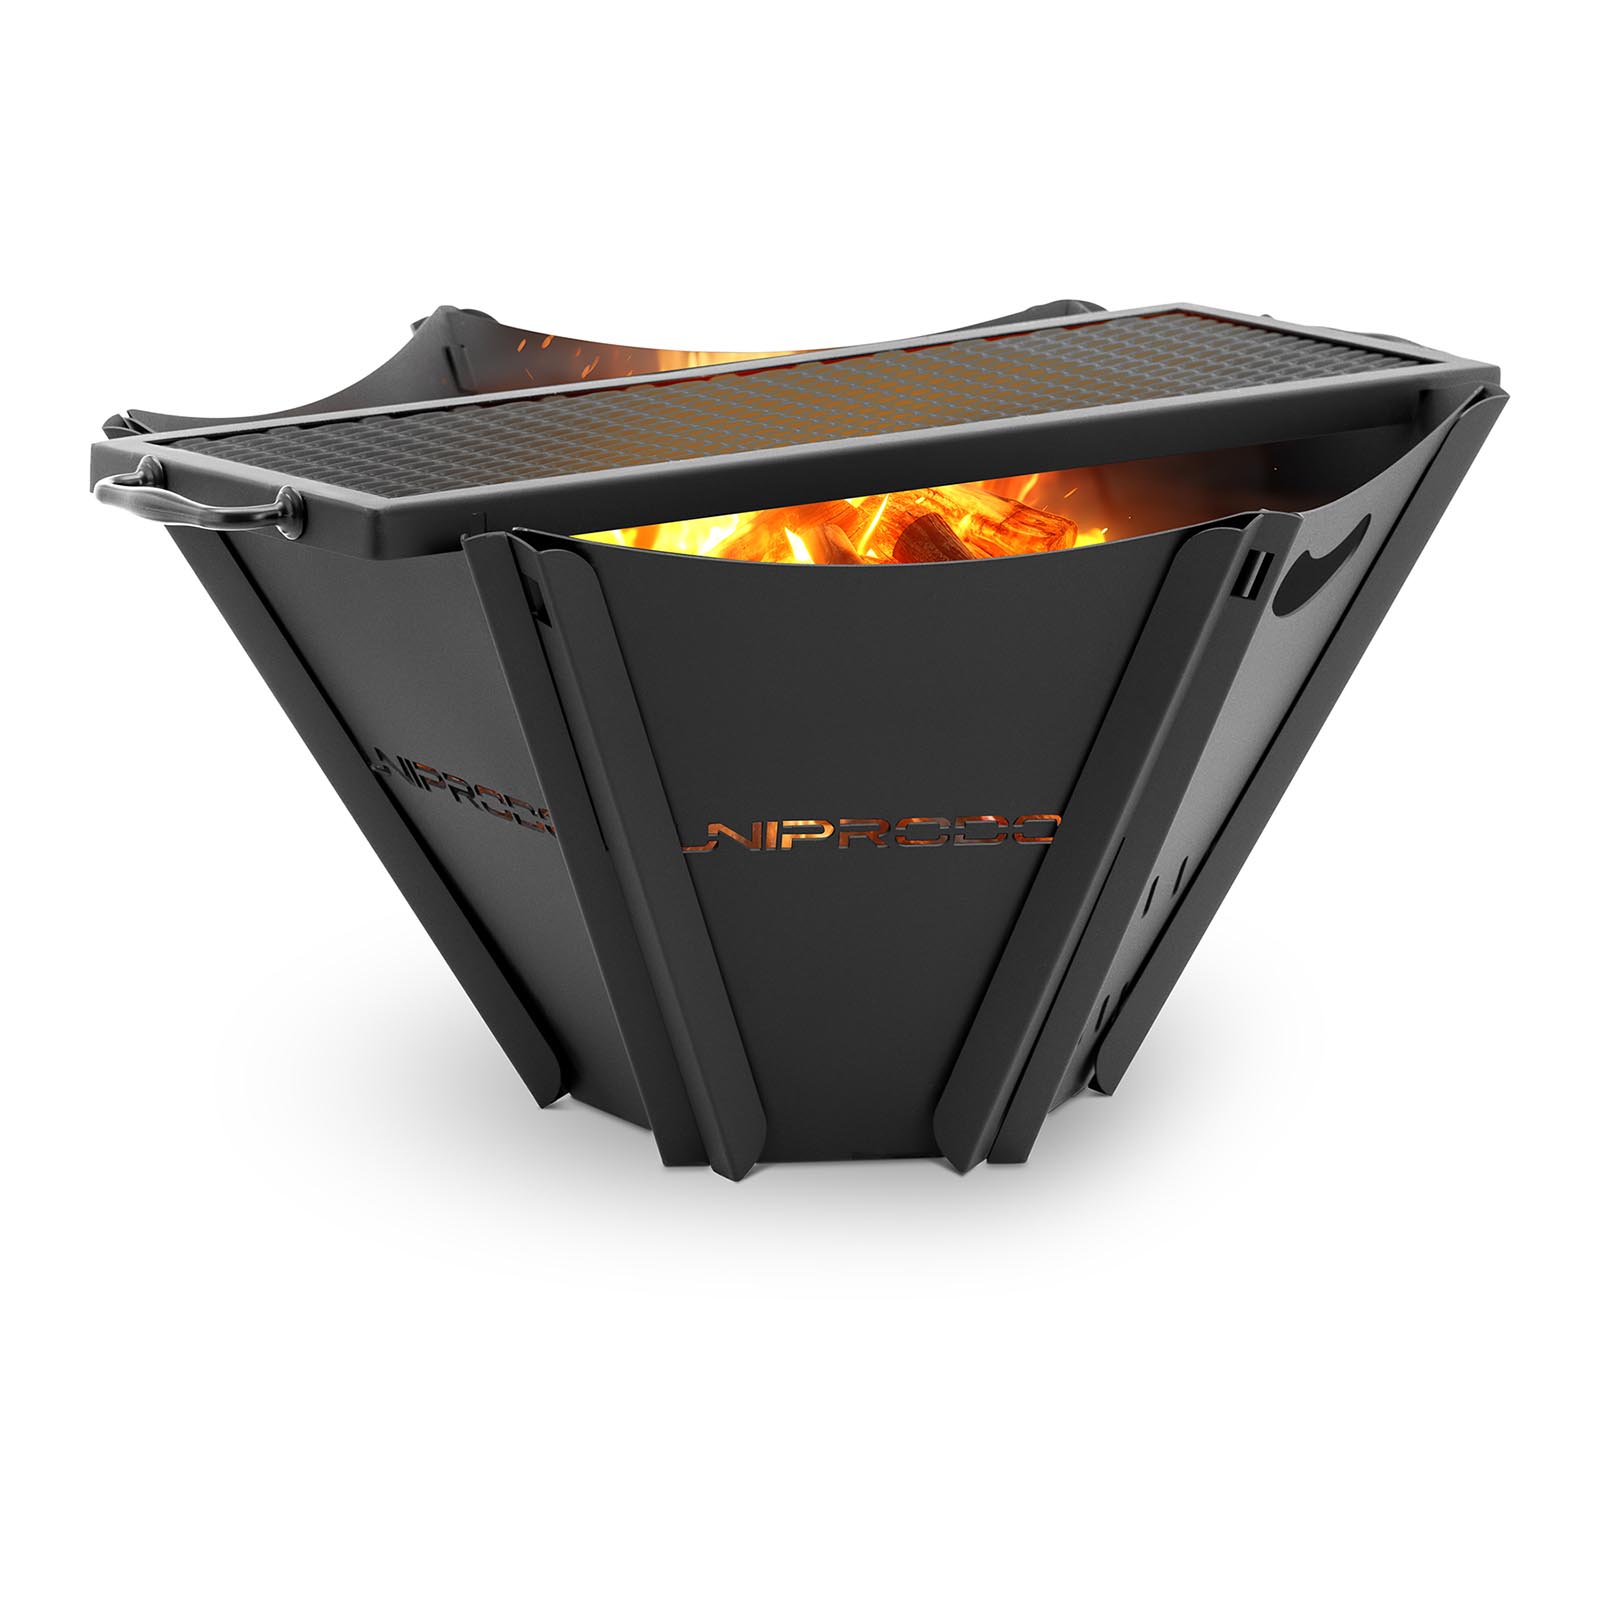 Fire bowl - with grill grate - 58 x 54 x 27.5 cm - interlocking